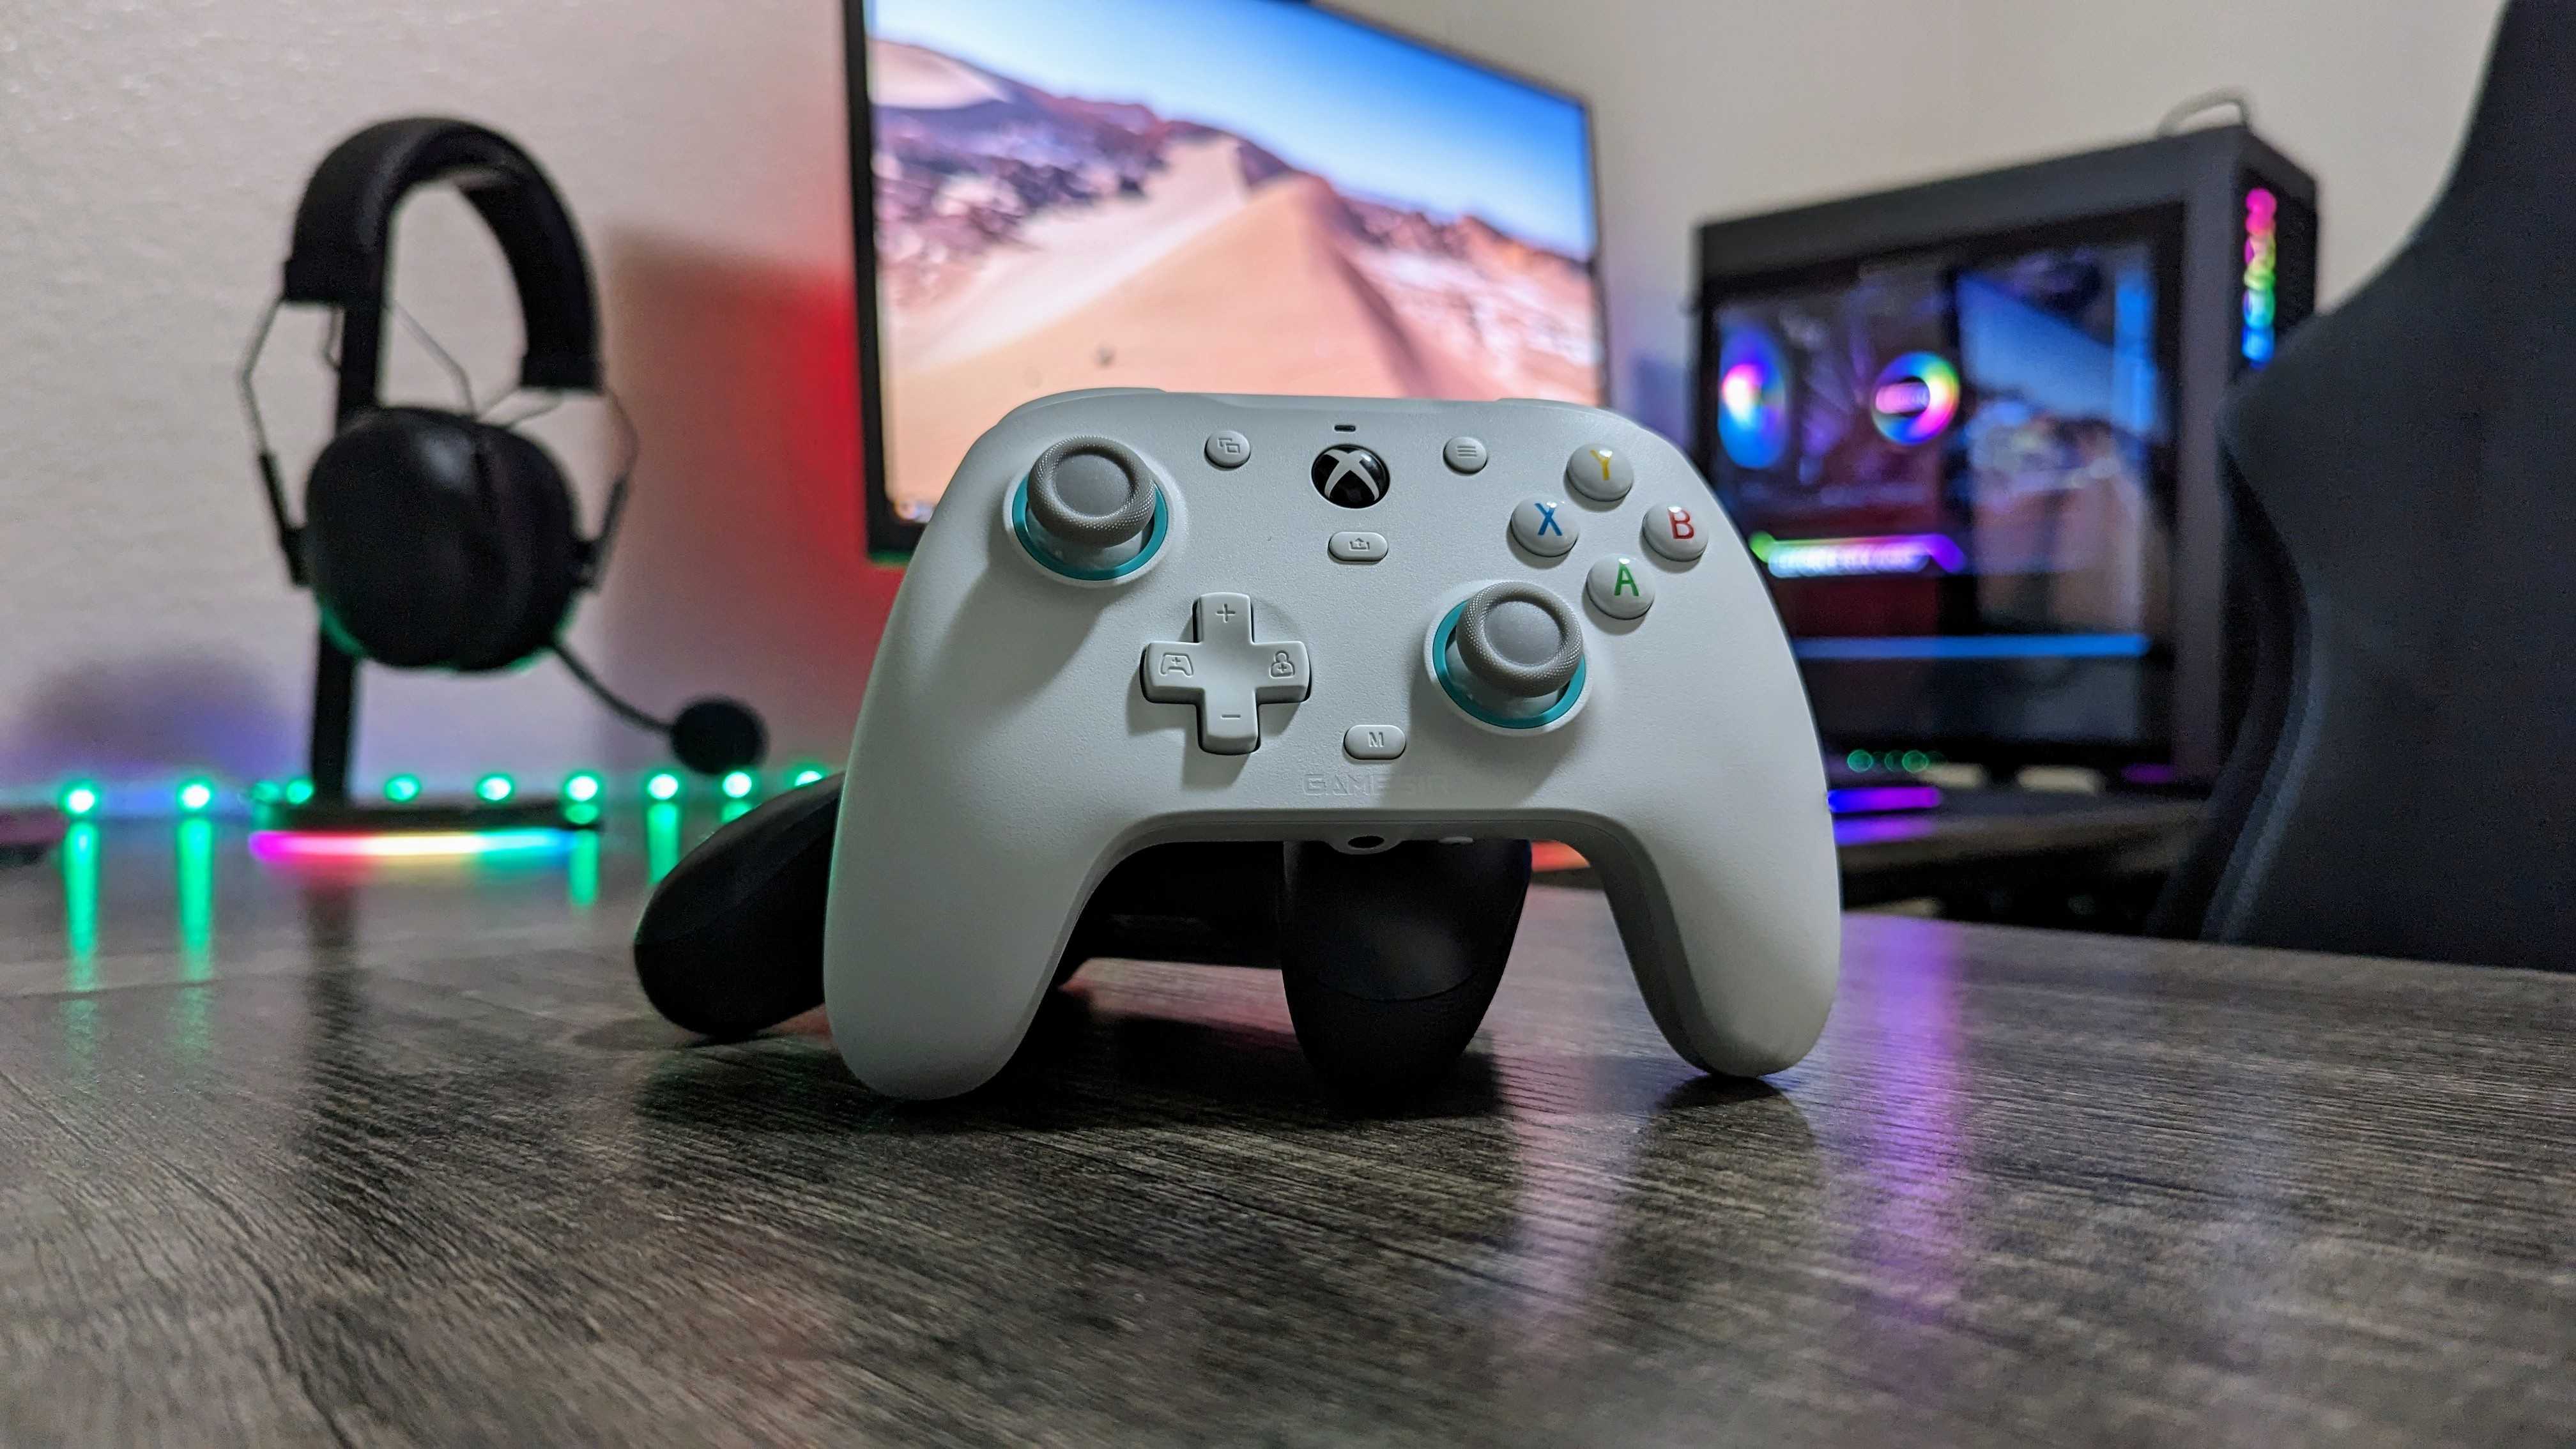 The gamesir g7 se is the best affordable xbox licensed controller